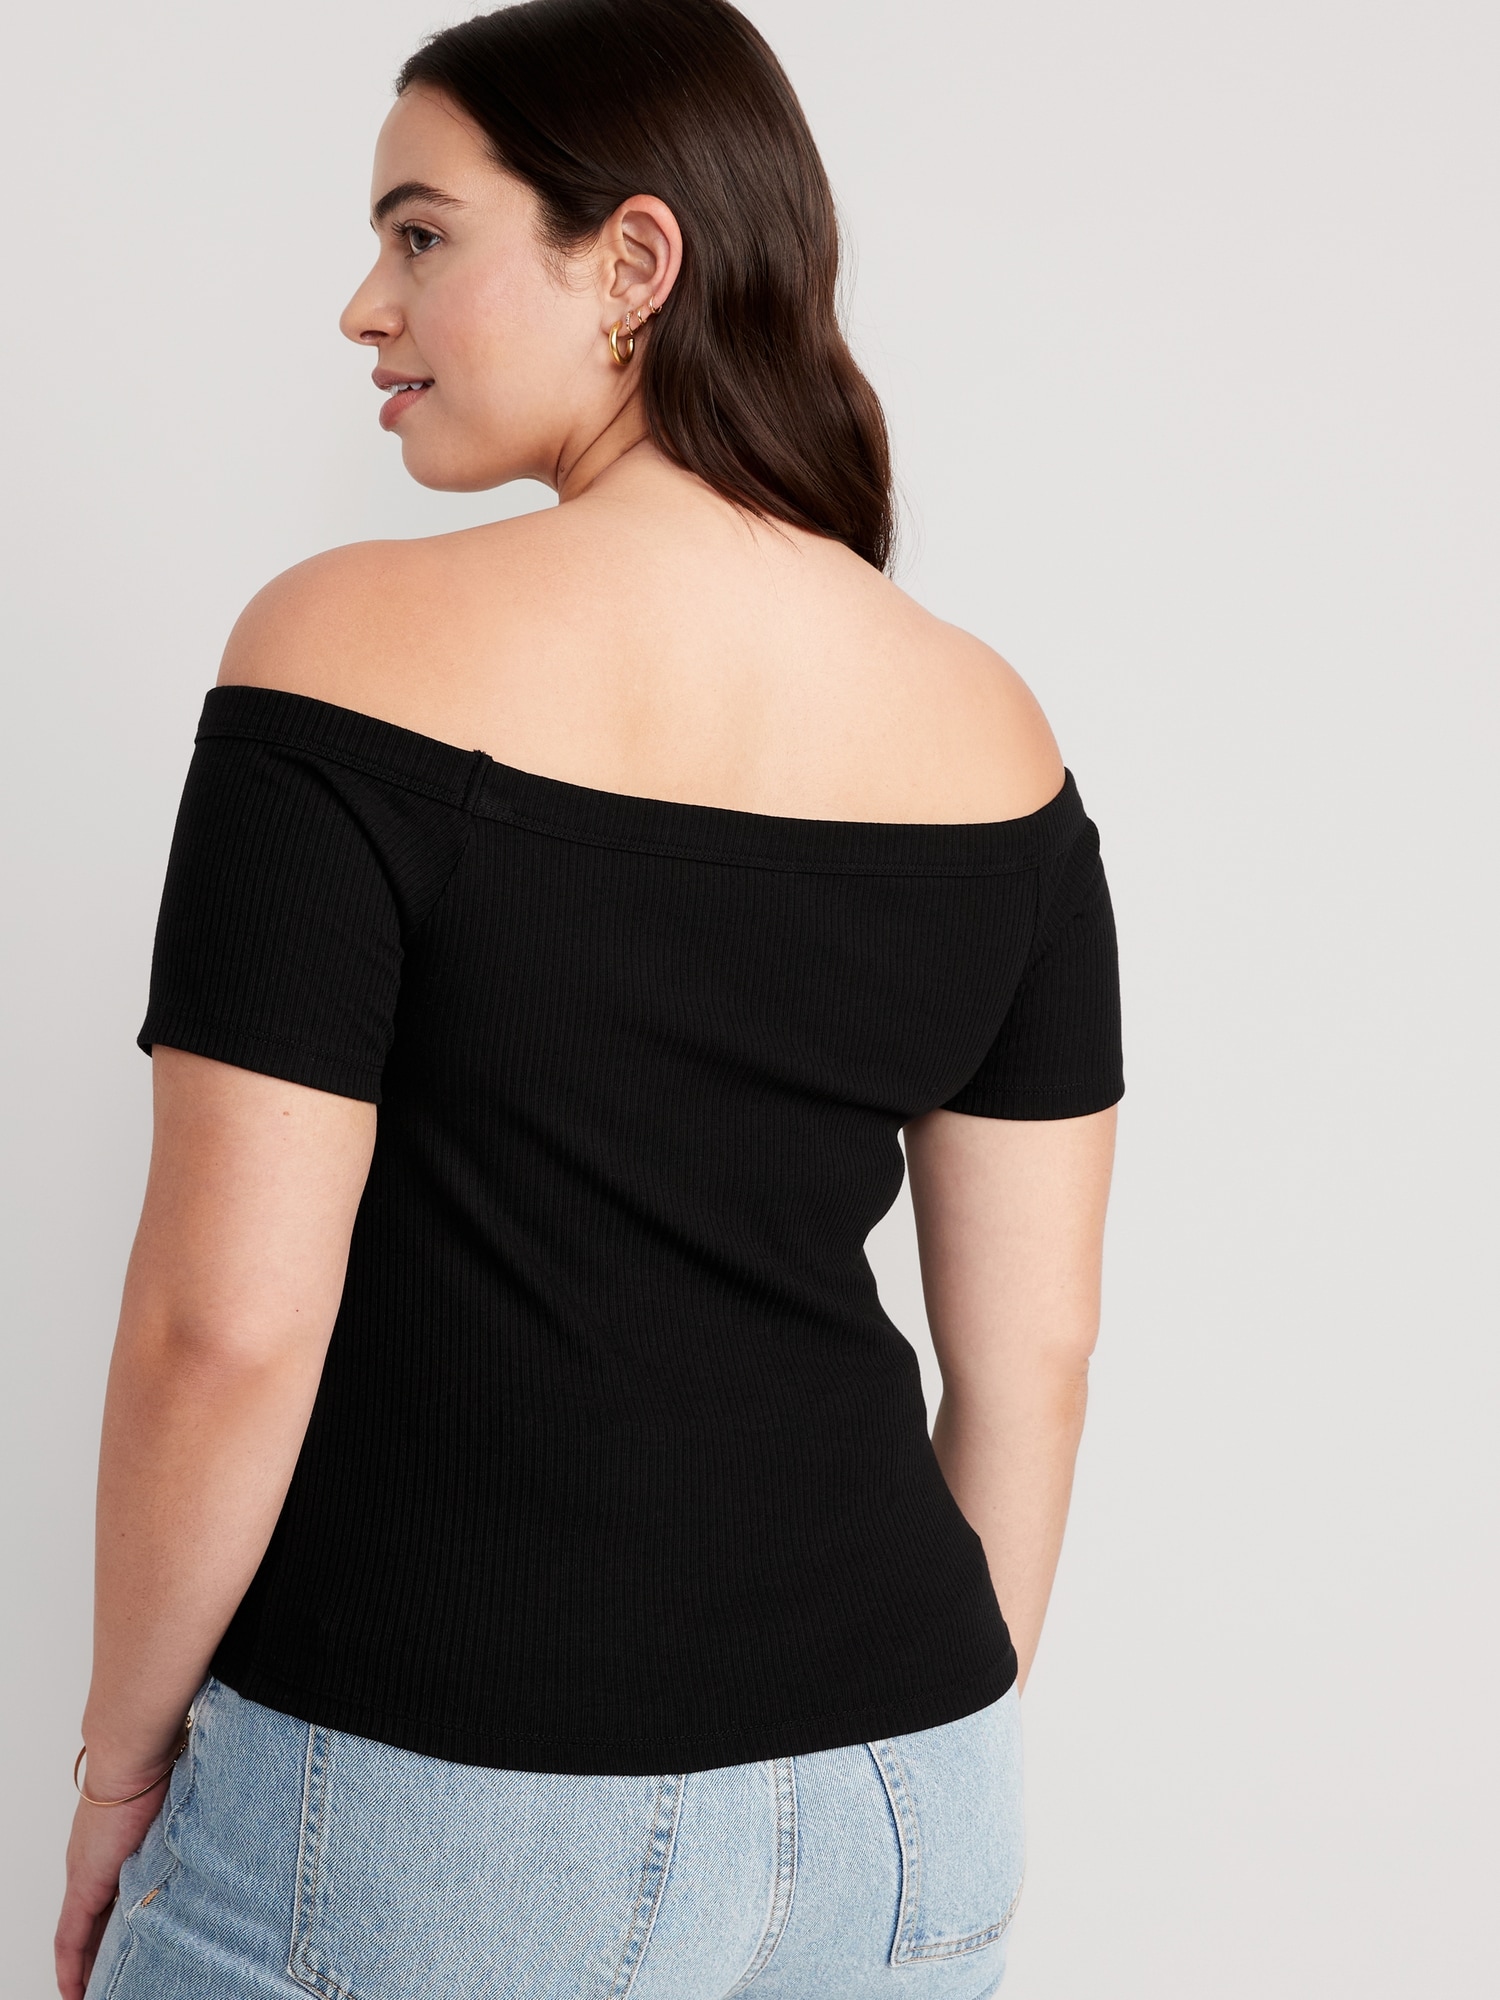 Fitted Off-The-Shoulder T-Shirt for Women Navy Old 